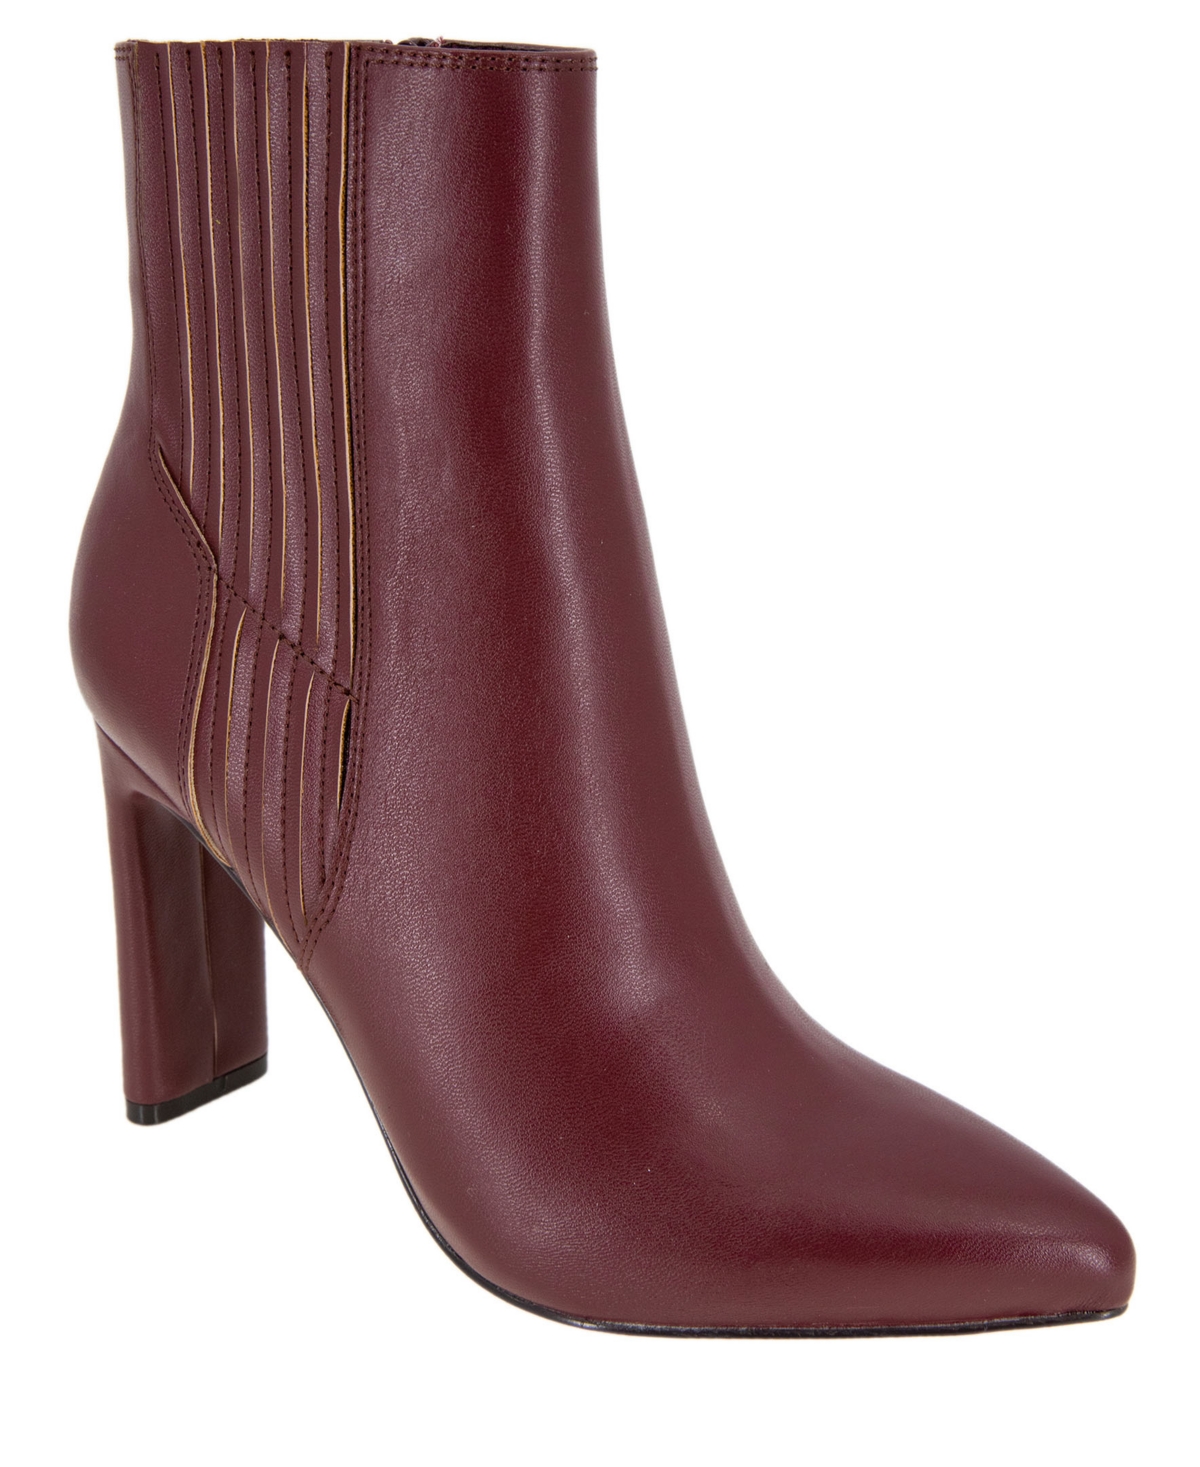 Women's Kalia Pointed Toe Boots - Port